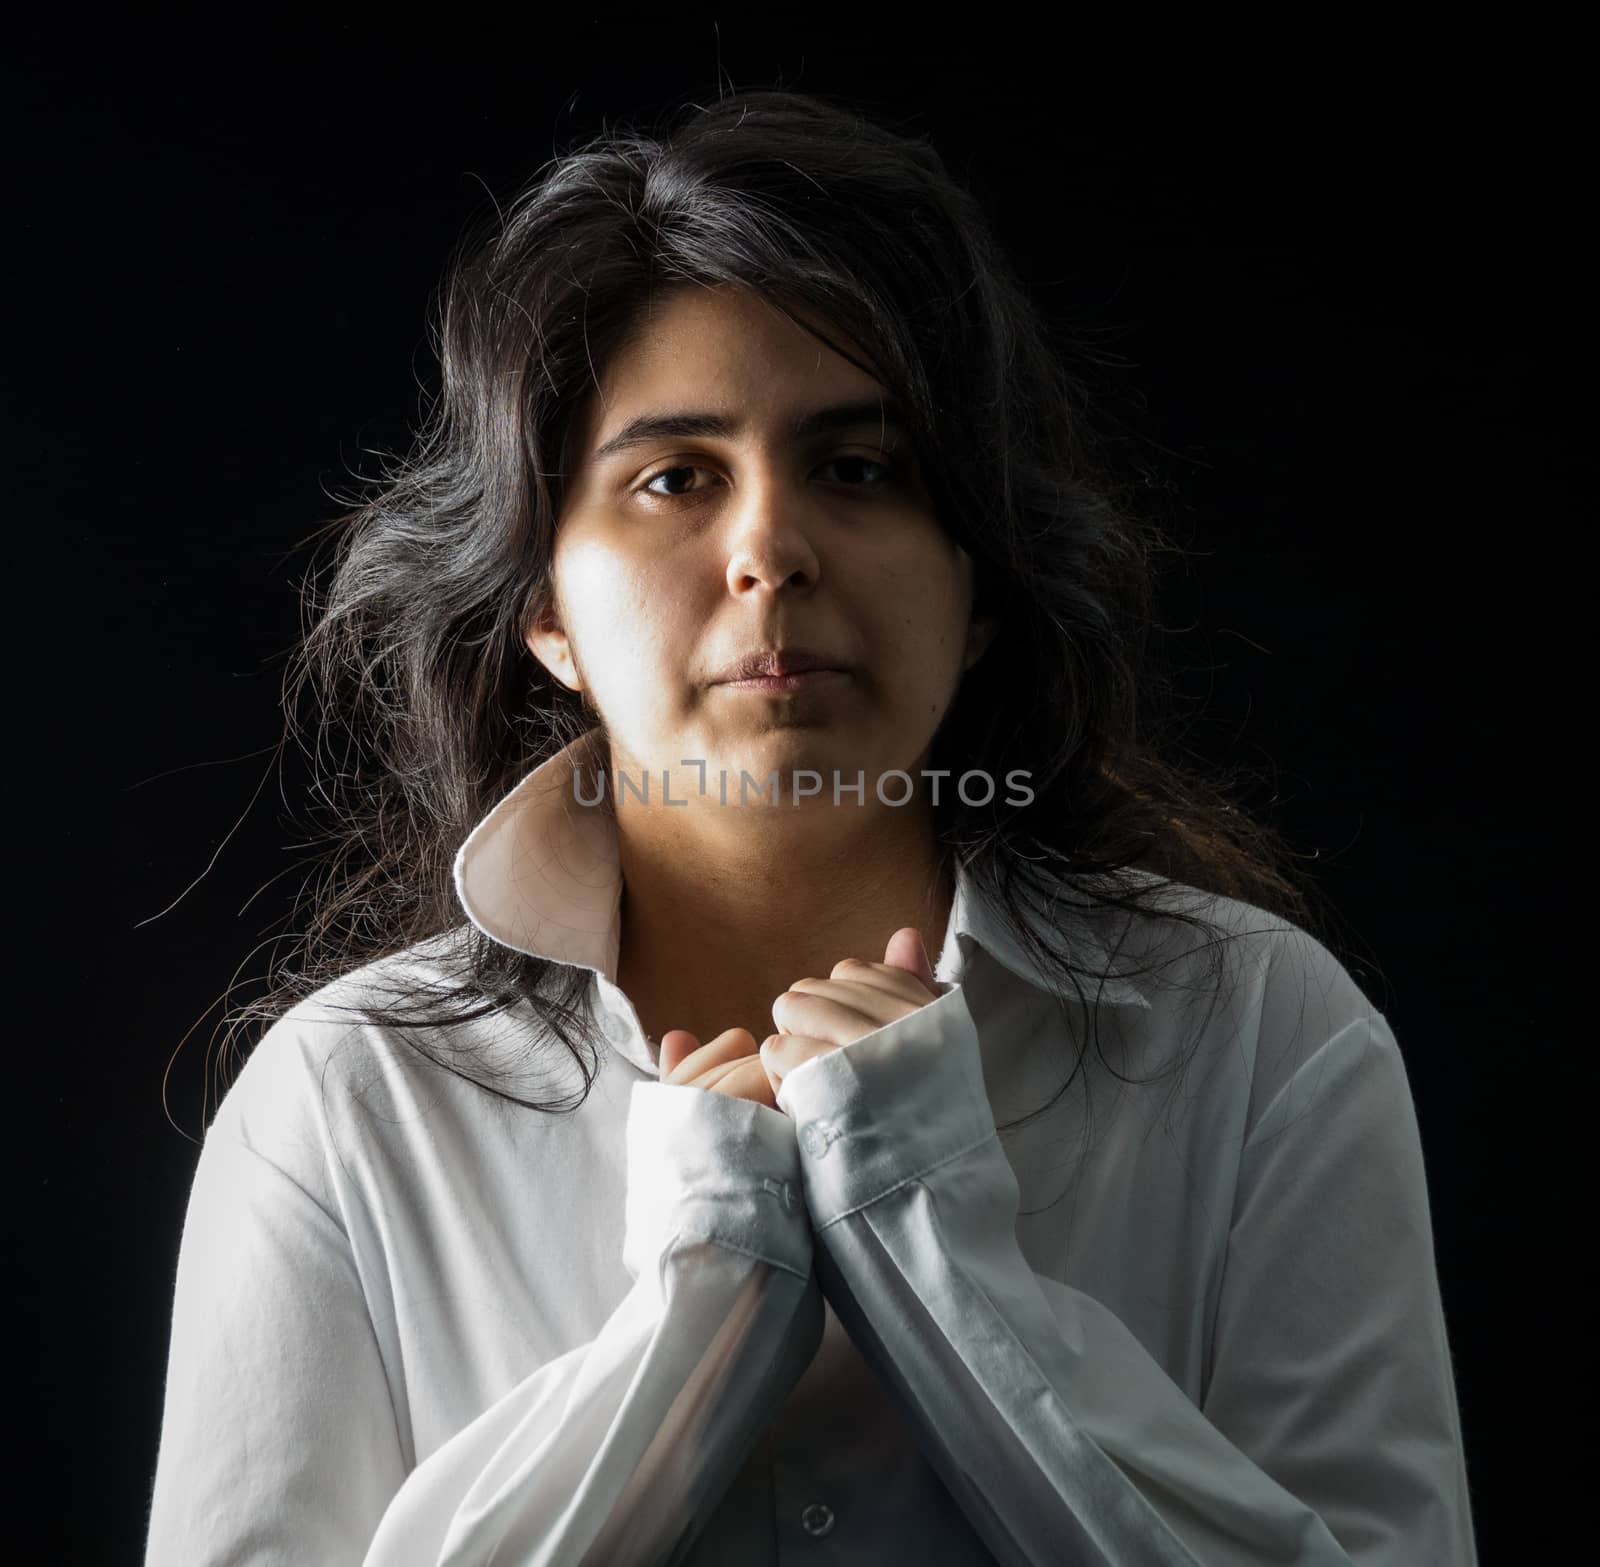 Latina teen in white long sleeved shirt standing in front of black backdrop